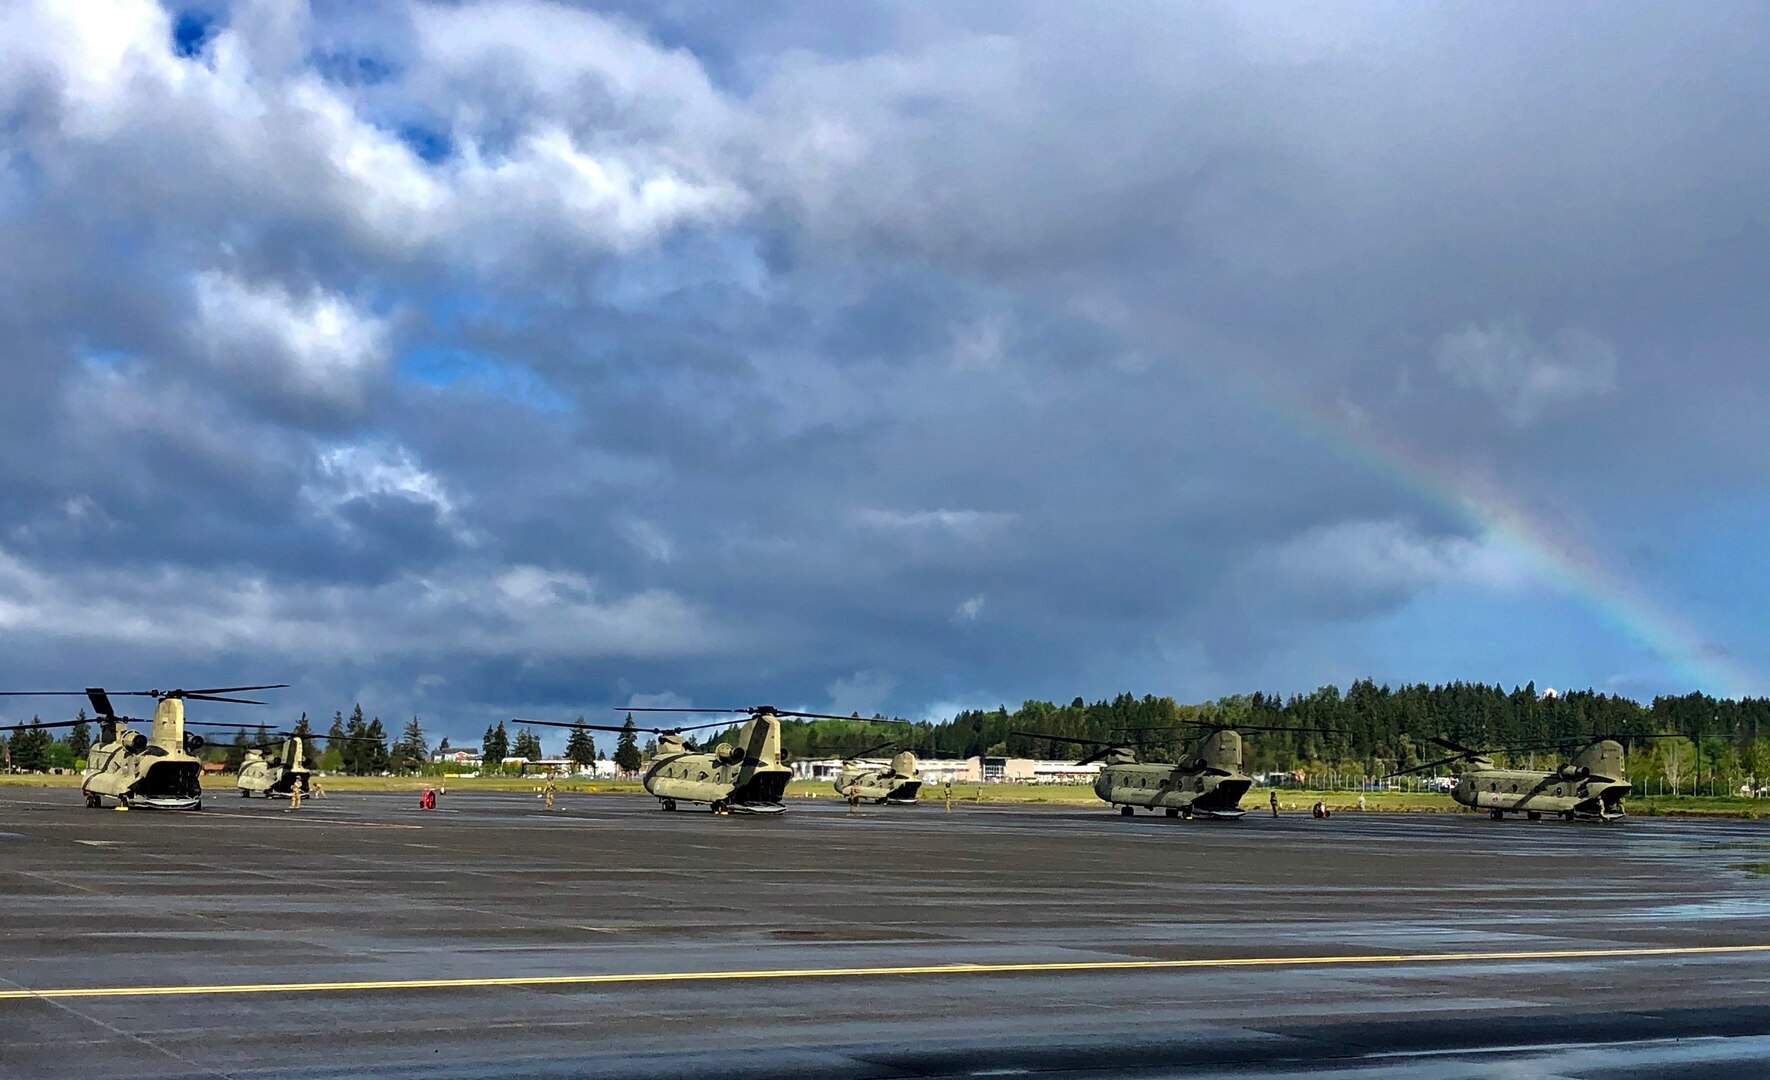 After a rainy morning a rainbow appears over the CH-47 Chinook helicopters during Bravo Company, 1st Battalion, 168th General Support Aviation deployment ceremony at the Washington Army National Guard Army Aviation Support Facility at Joint Base Lewis-McChord, Washington, May 6, 2020. Bravo Company is set to deploy to the Middle East for the third time in 10 years.